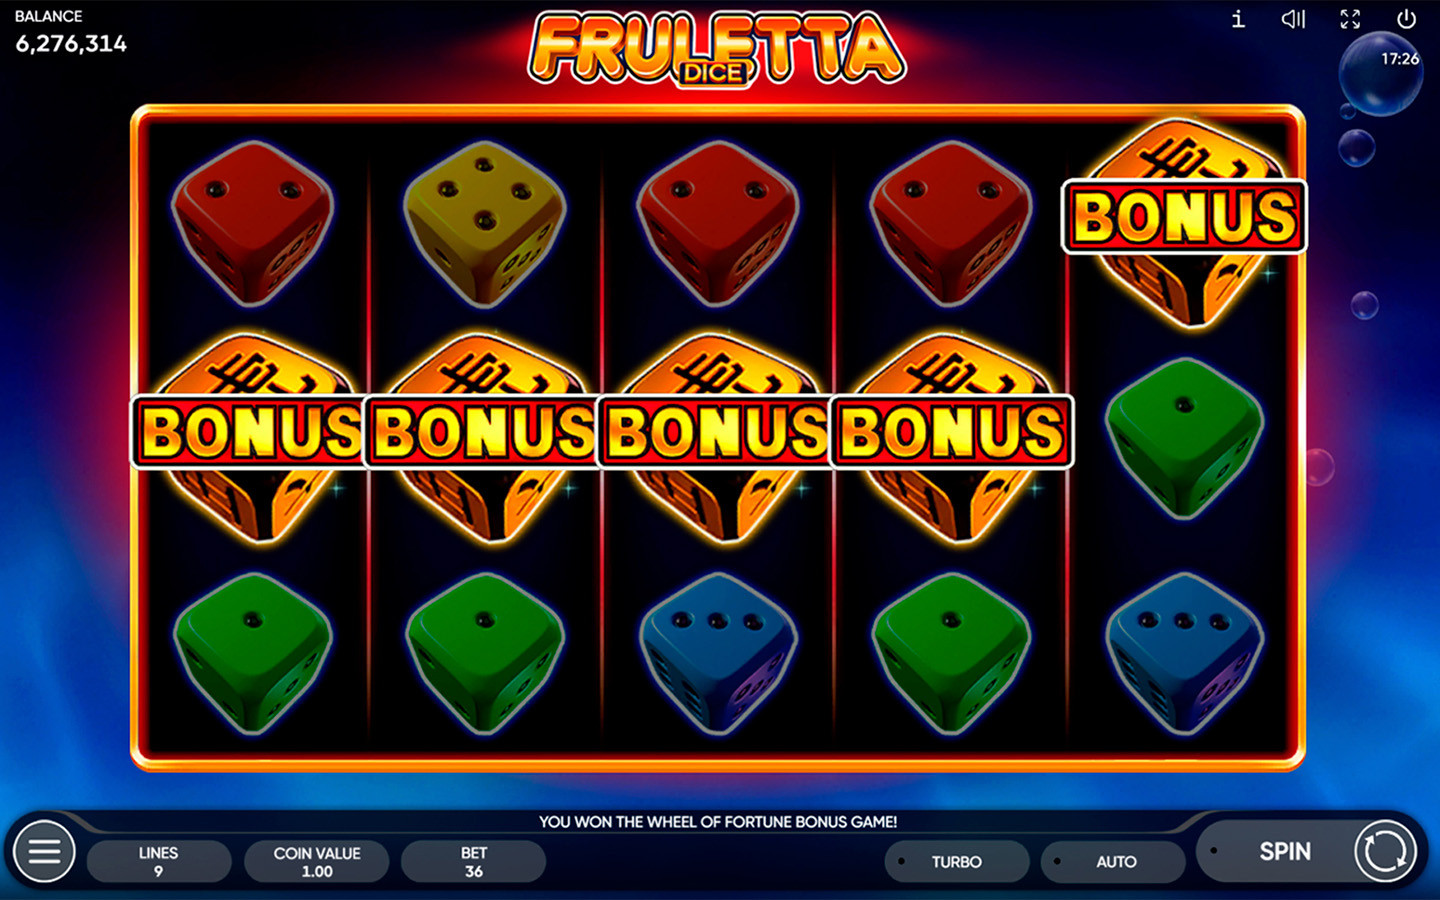 ONLINE GAMING SOFTWARE SOLUTIONS | New fruit slot by Endorphina Fruletta Dice has just been launched